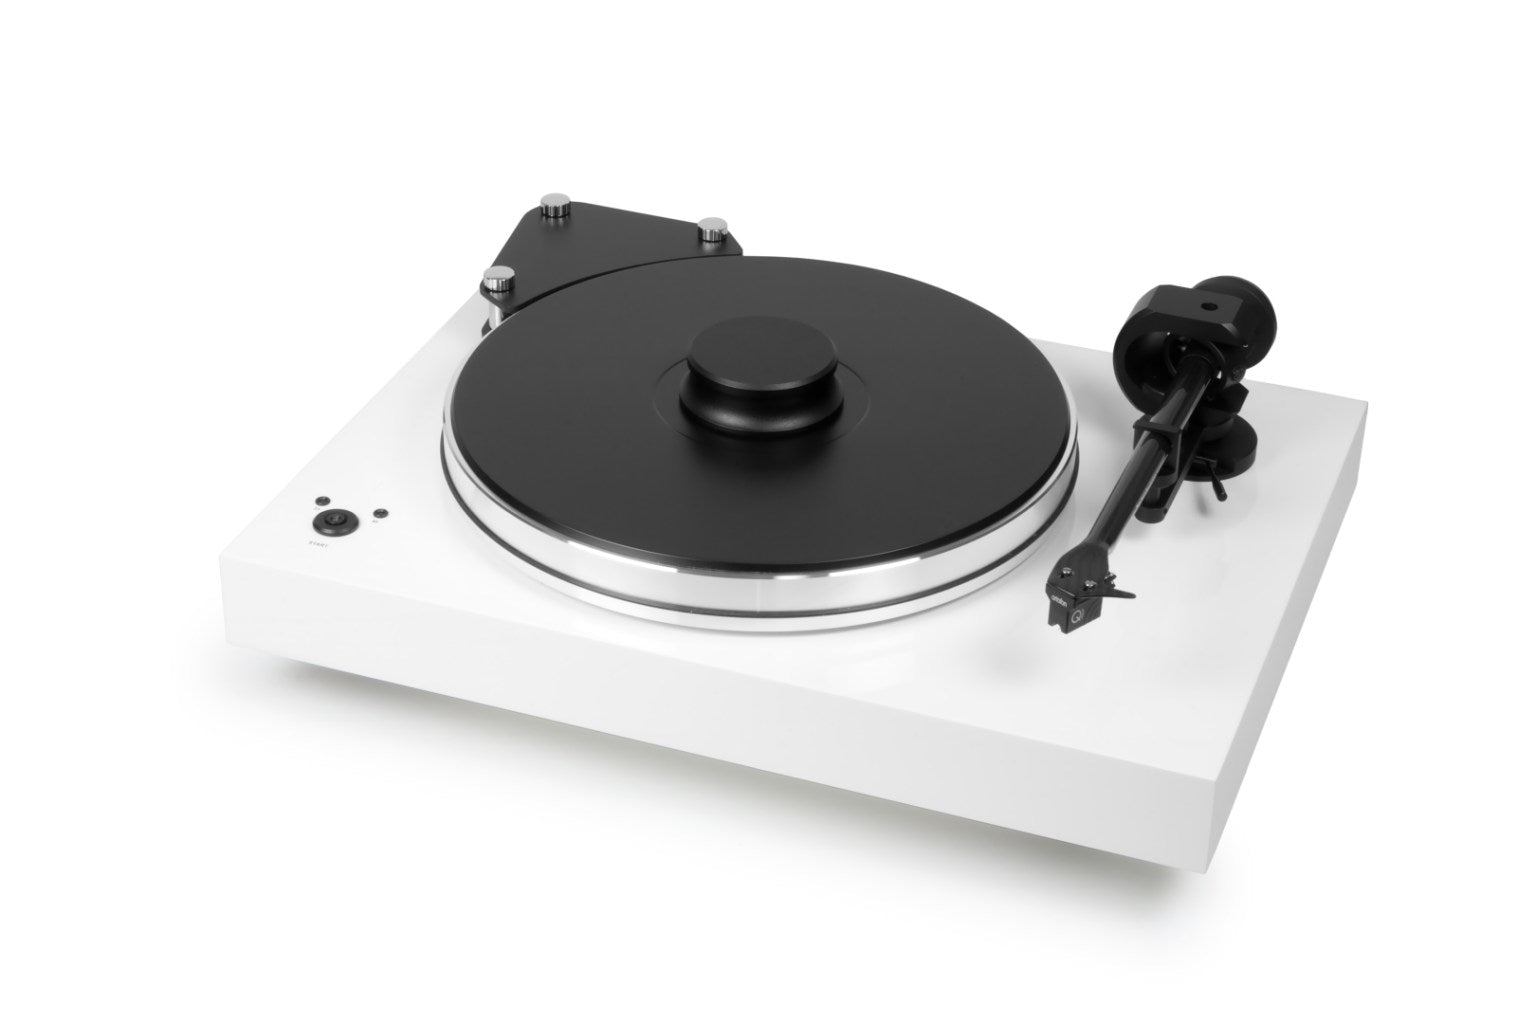 PRO-JECT- XTENSION 9 EVOLUTION - Pro-ject Audio at Vinyl Sound. Available at the best price: Pro-ject Turntables X1 - X8 - X2 – Pro-ject 6 PerspeX SB - RPM 1 Carbon - RPM 10 Carbon – Xtension 12 Evolution... Pro-ject HiFi Electronics Phono Preamplifier · Vinyl Recording · Pro-ject Preamplifier – Pro-ject Phono Box...